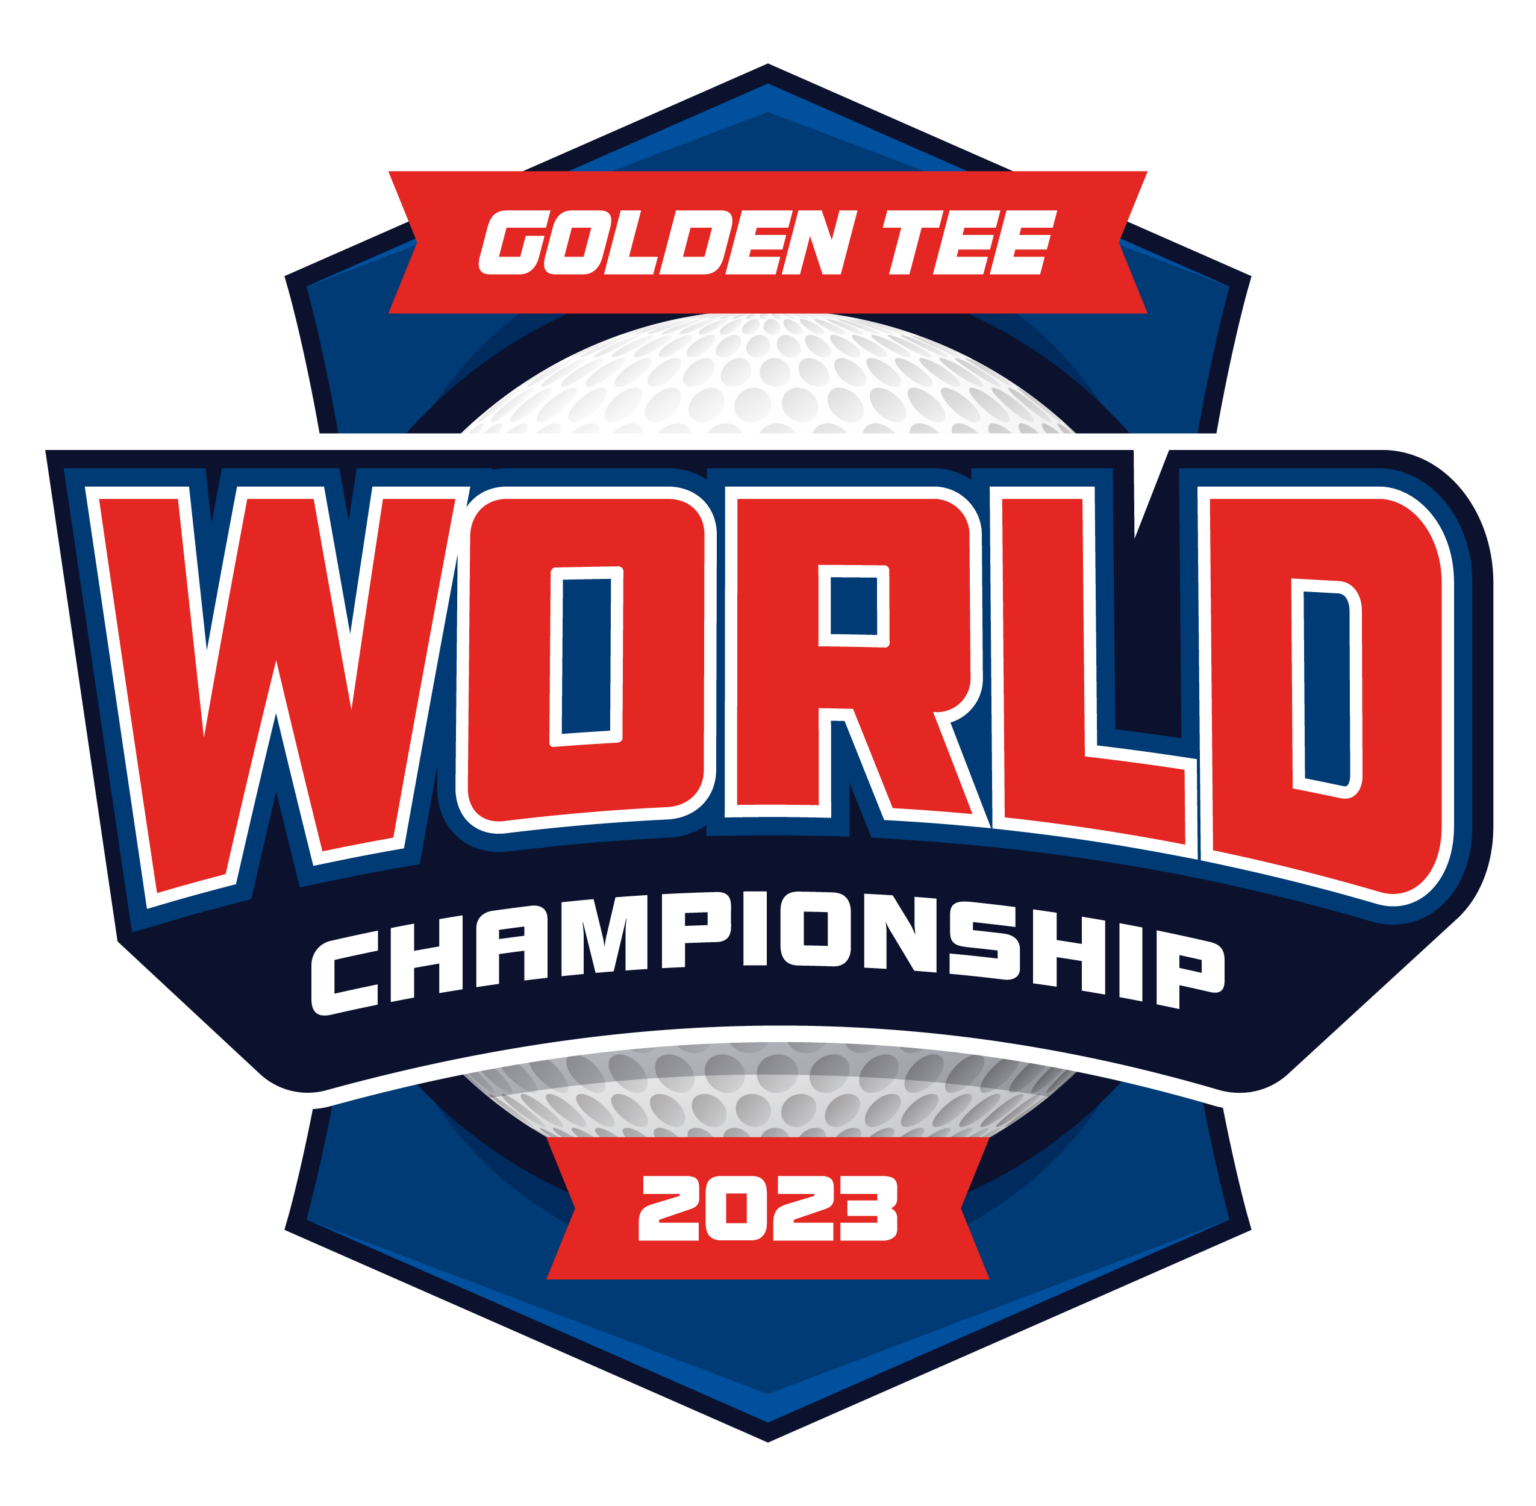 2023 Golden Tee Championship Heading to Las Vegas This July